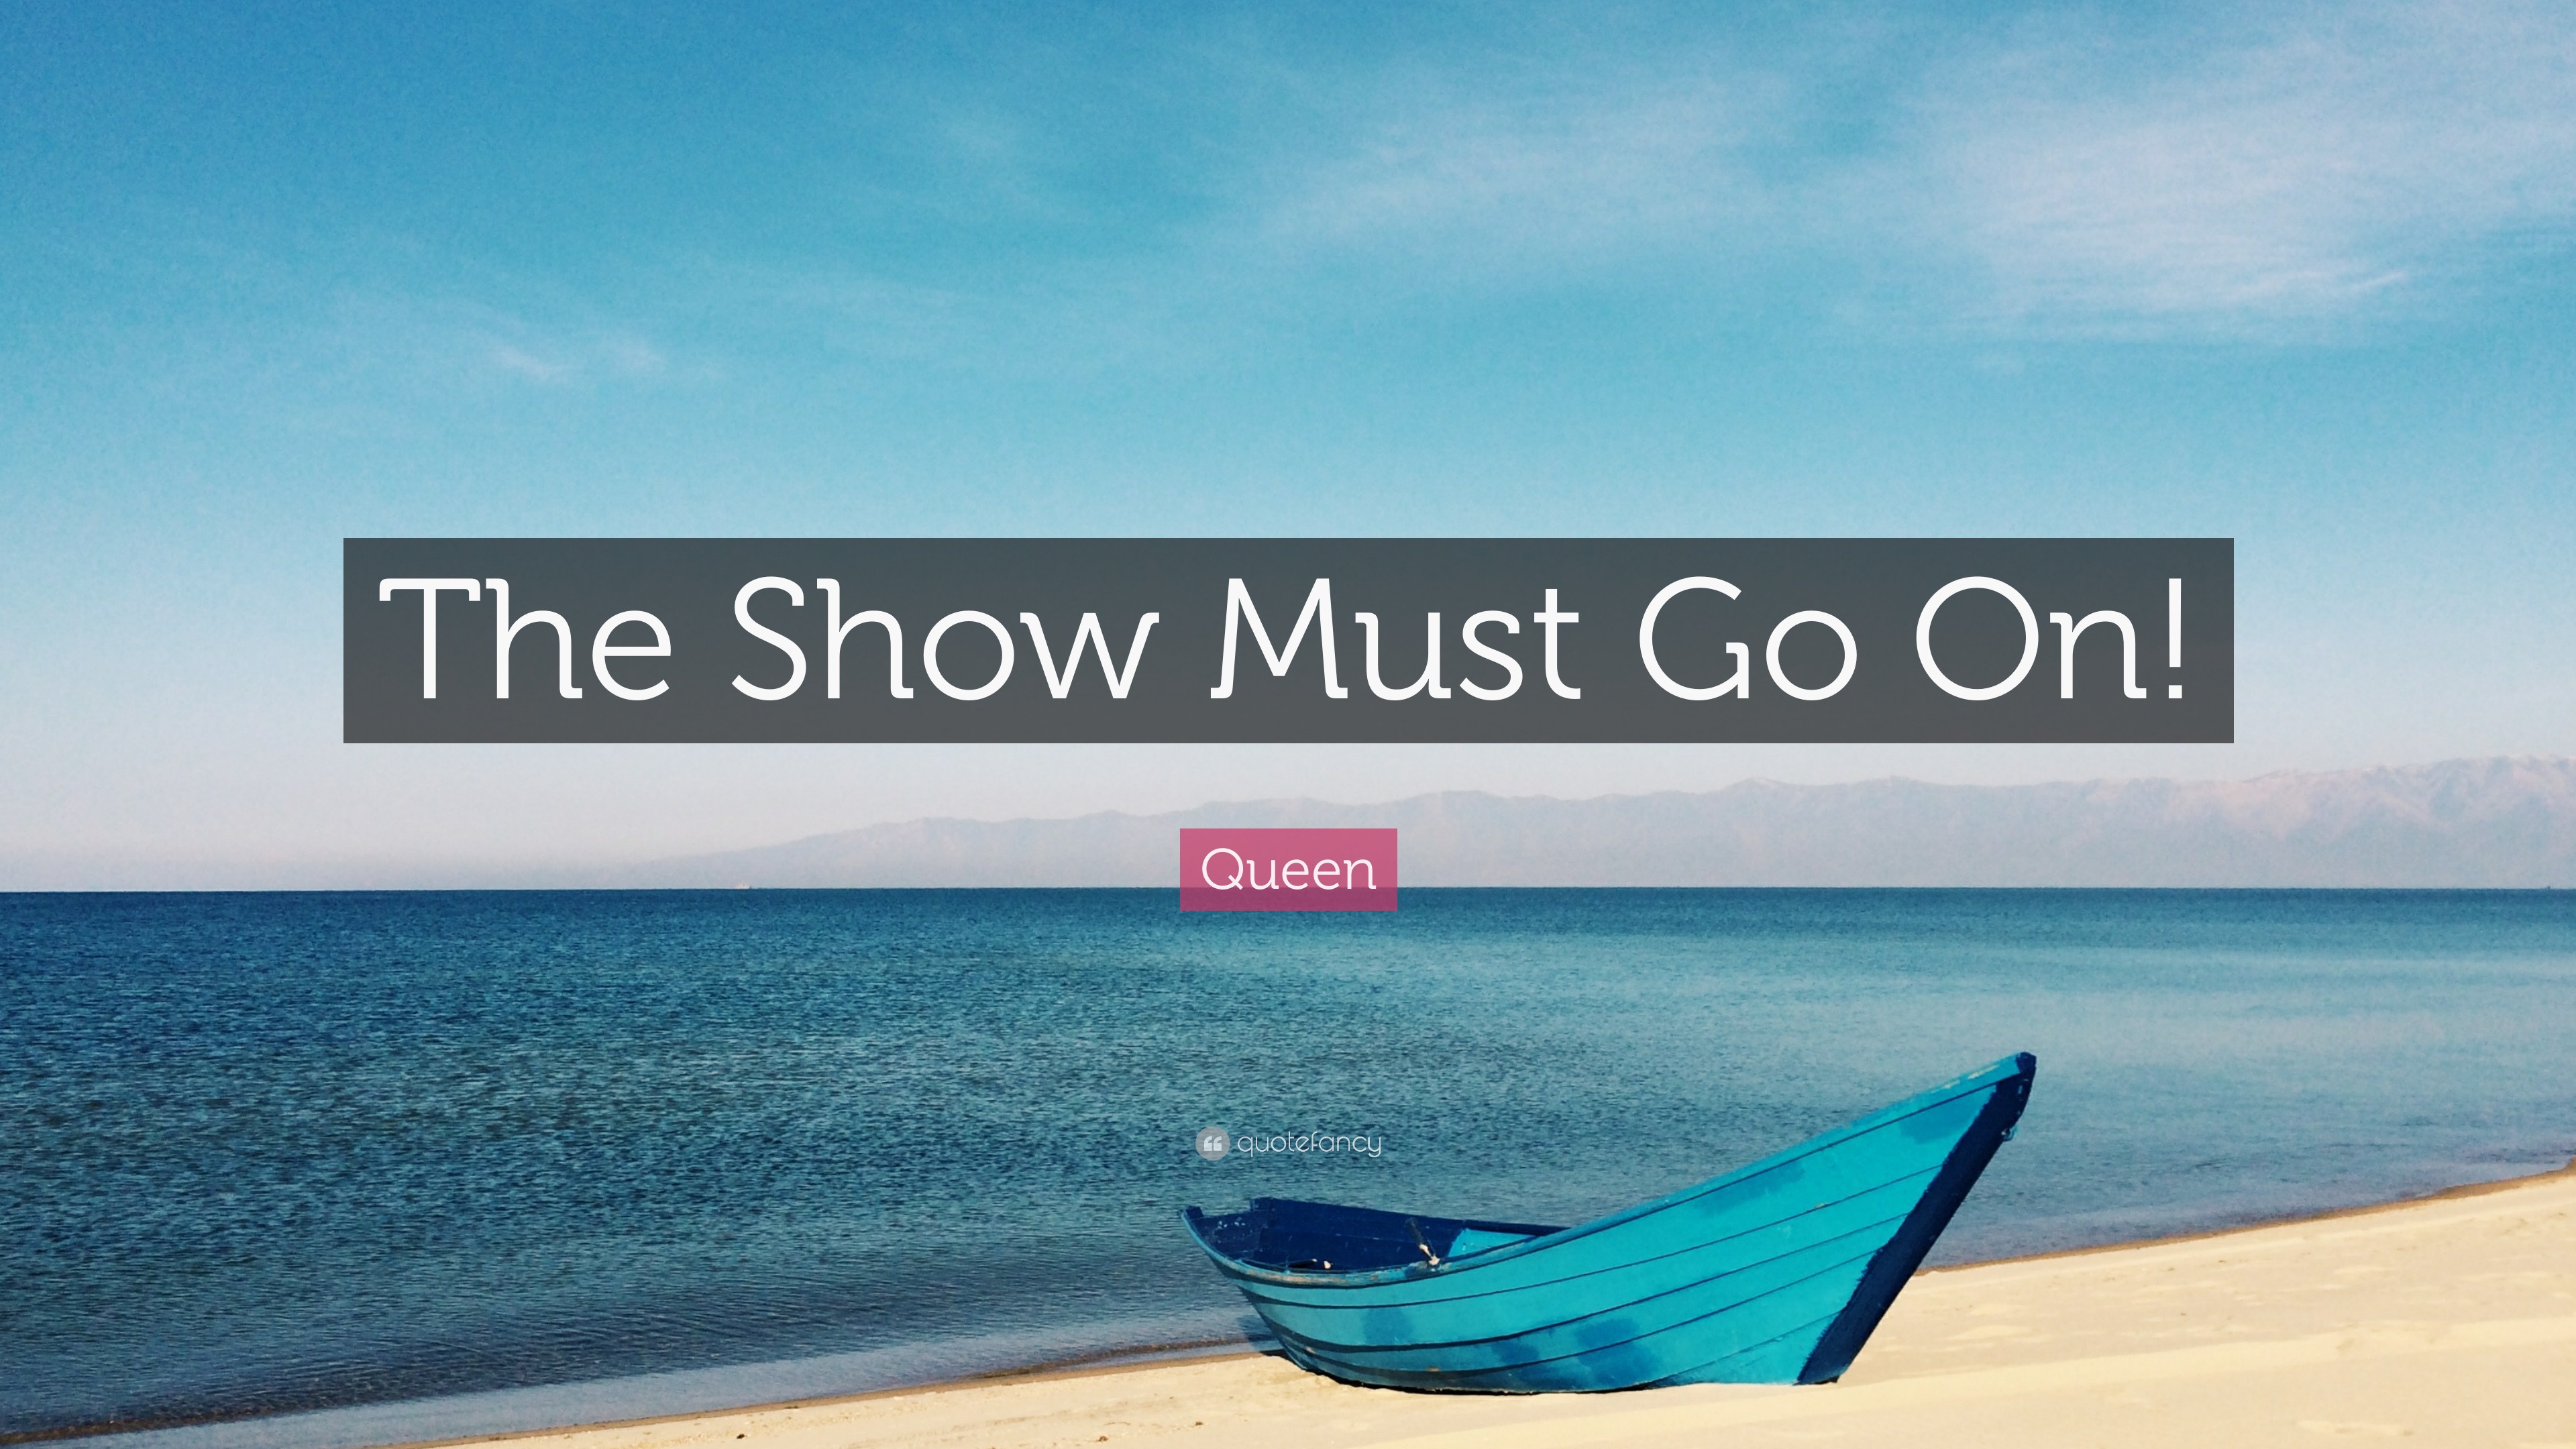 Queen, the show must go on